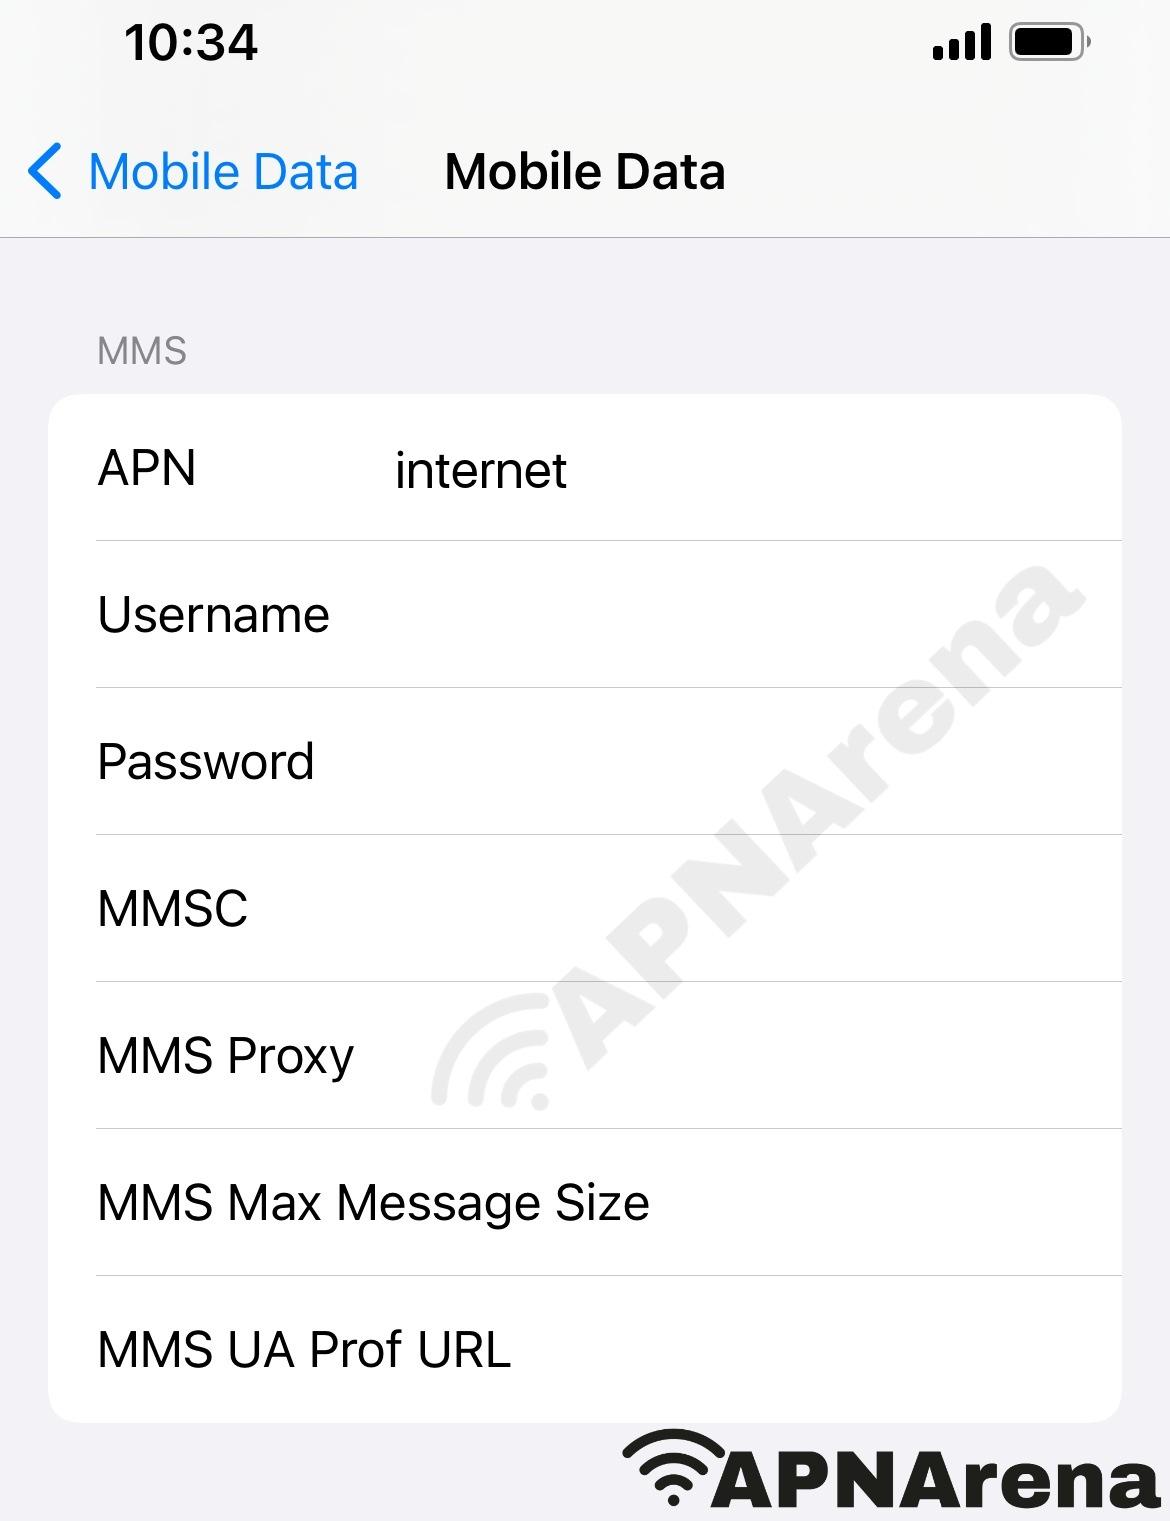 North American Local MMS Settings for iPhone